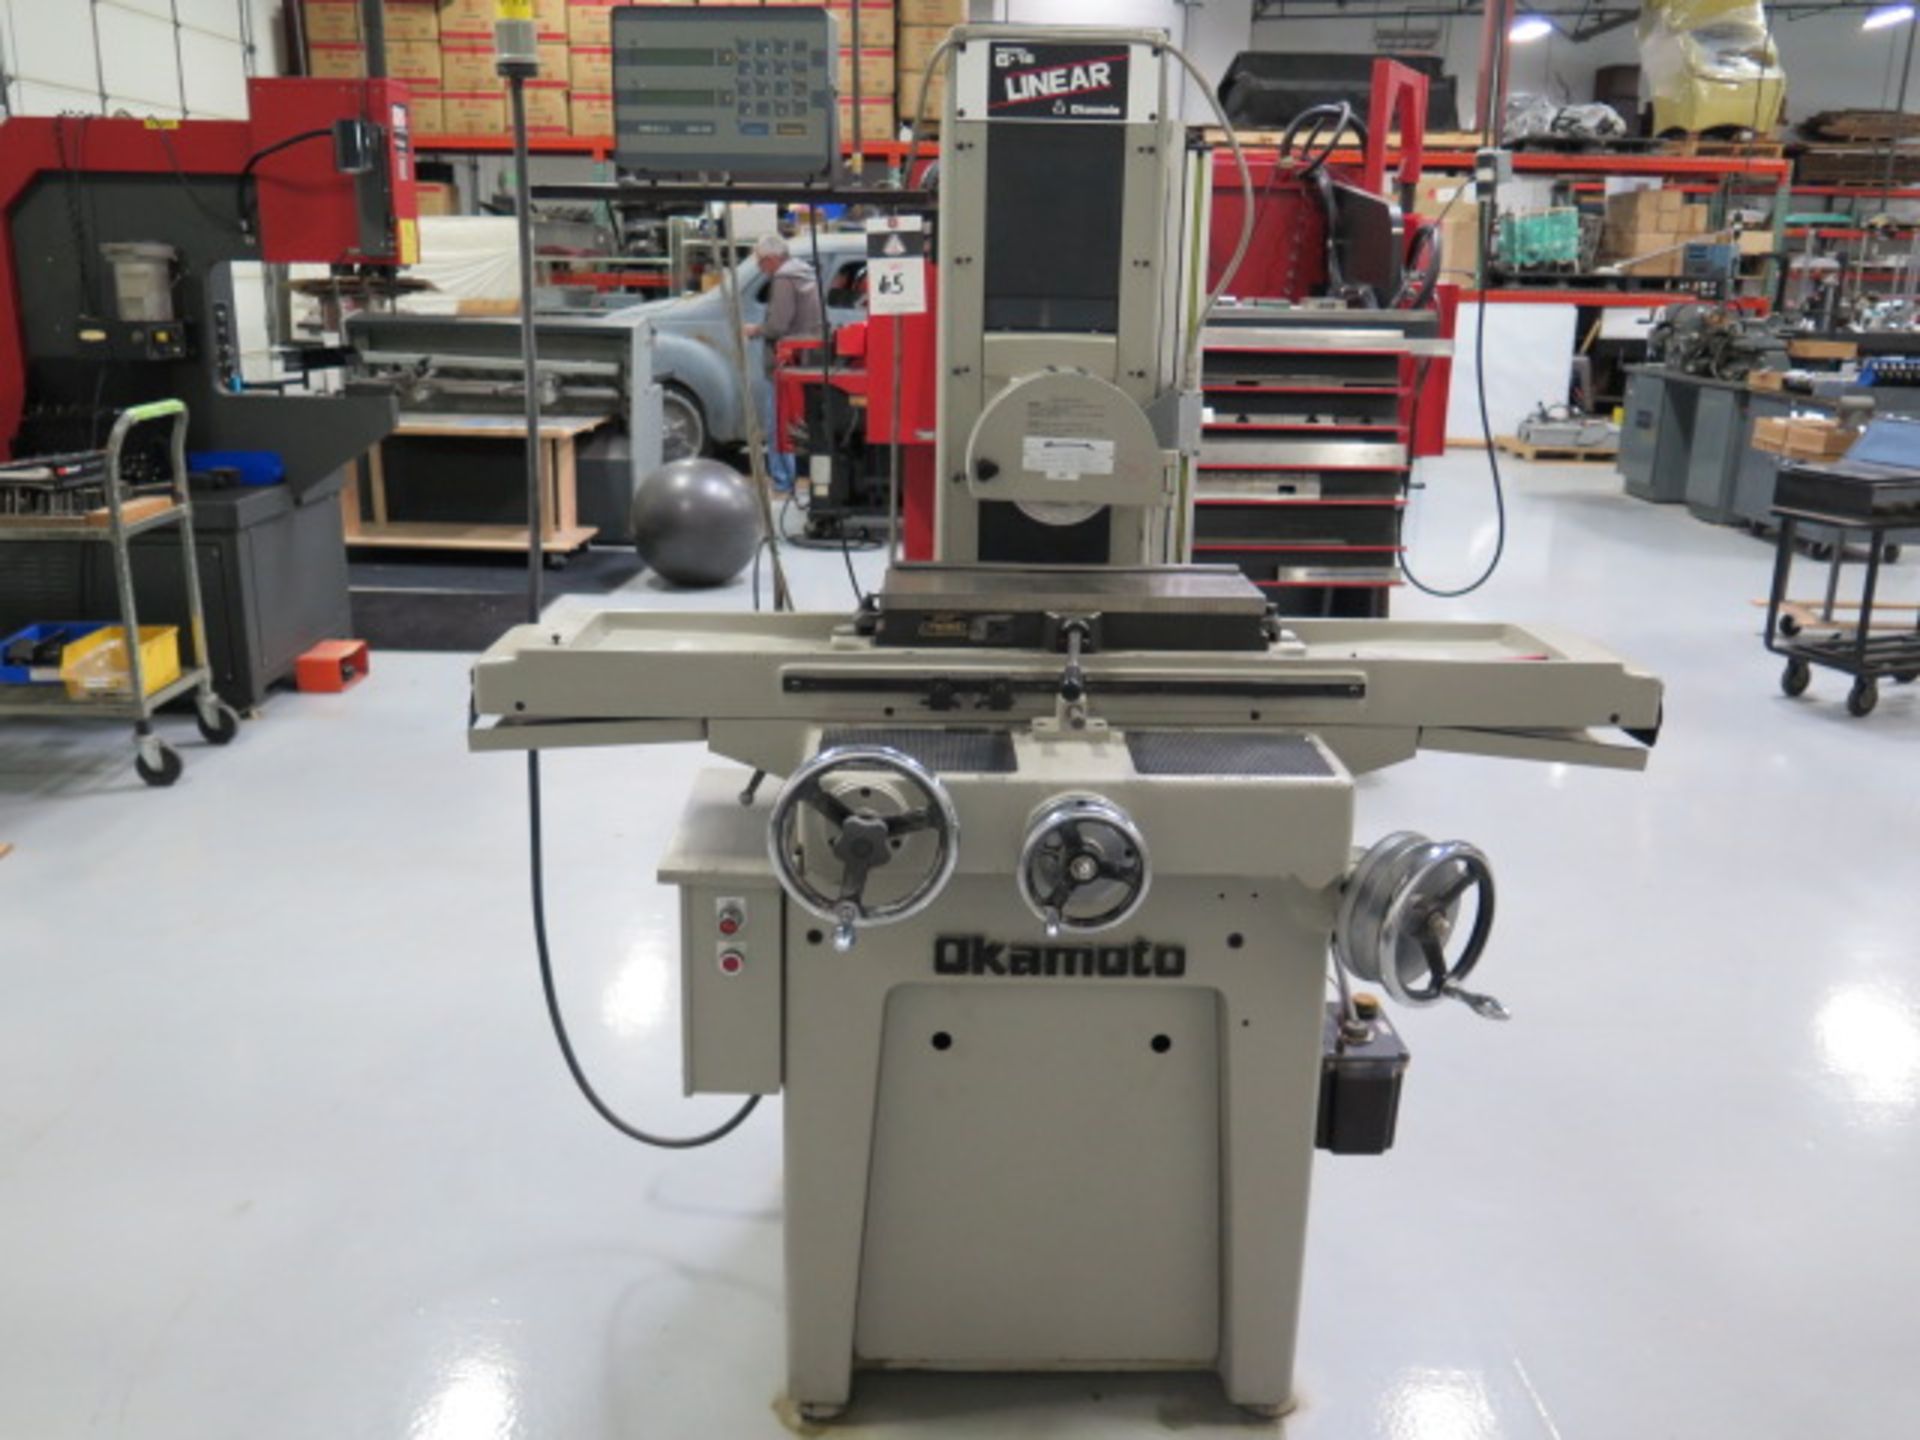 Okamoto “6-18 LINEAR” 6” x 18” Surface Grinder s/n 4469 w/ Mitutoyo UDR-220 Program DRO, SOLD AS IS